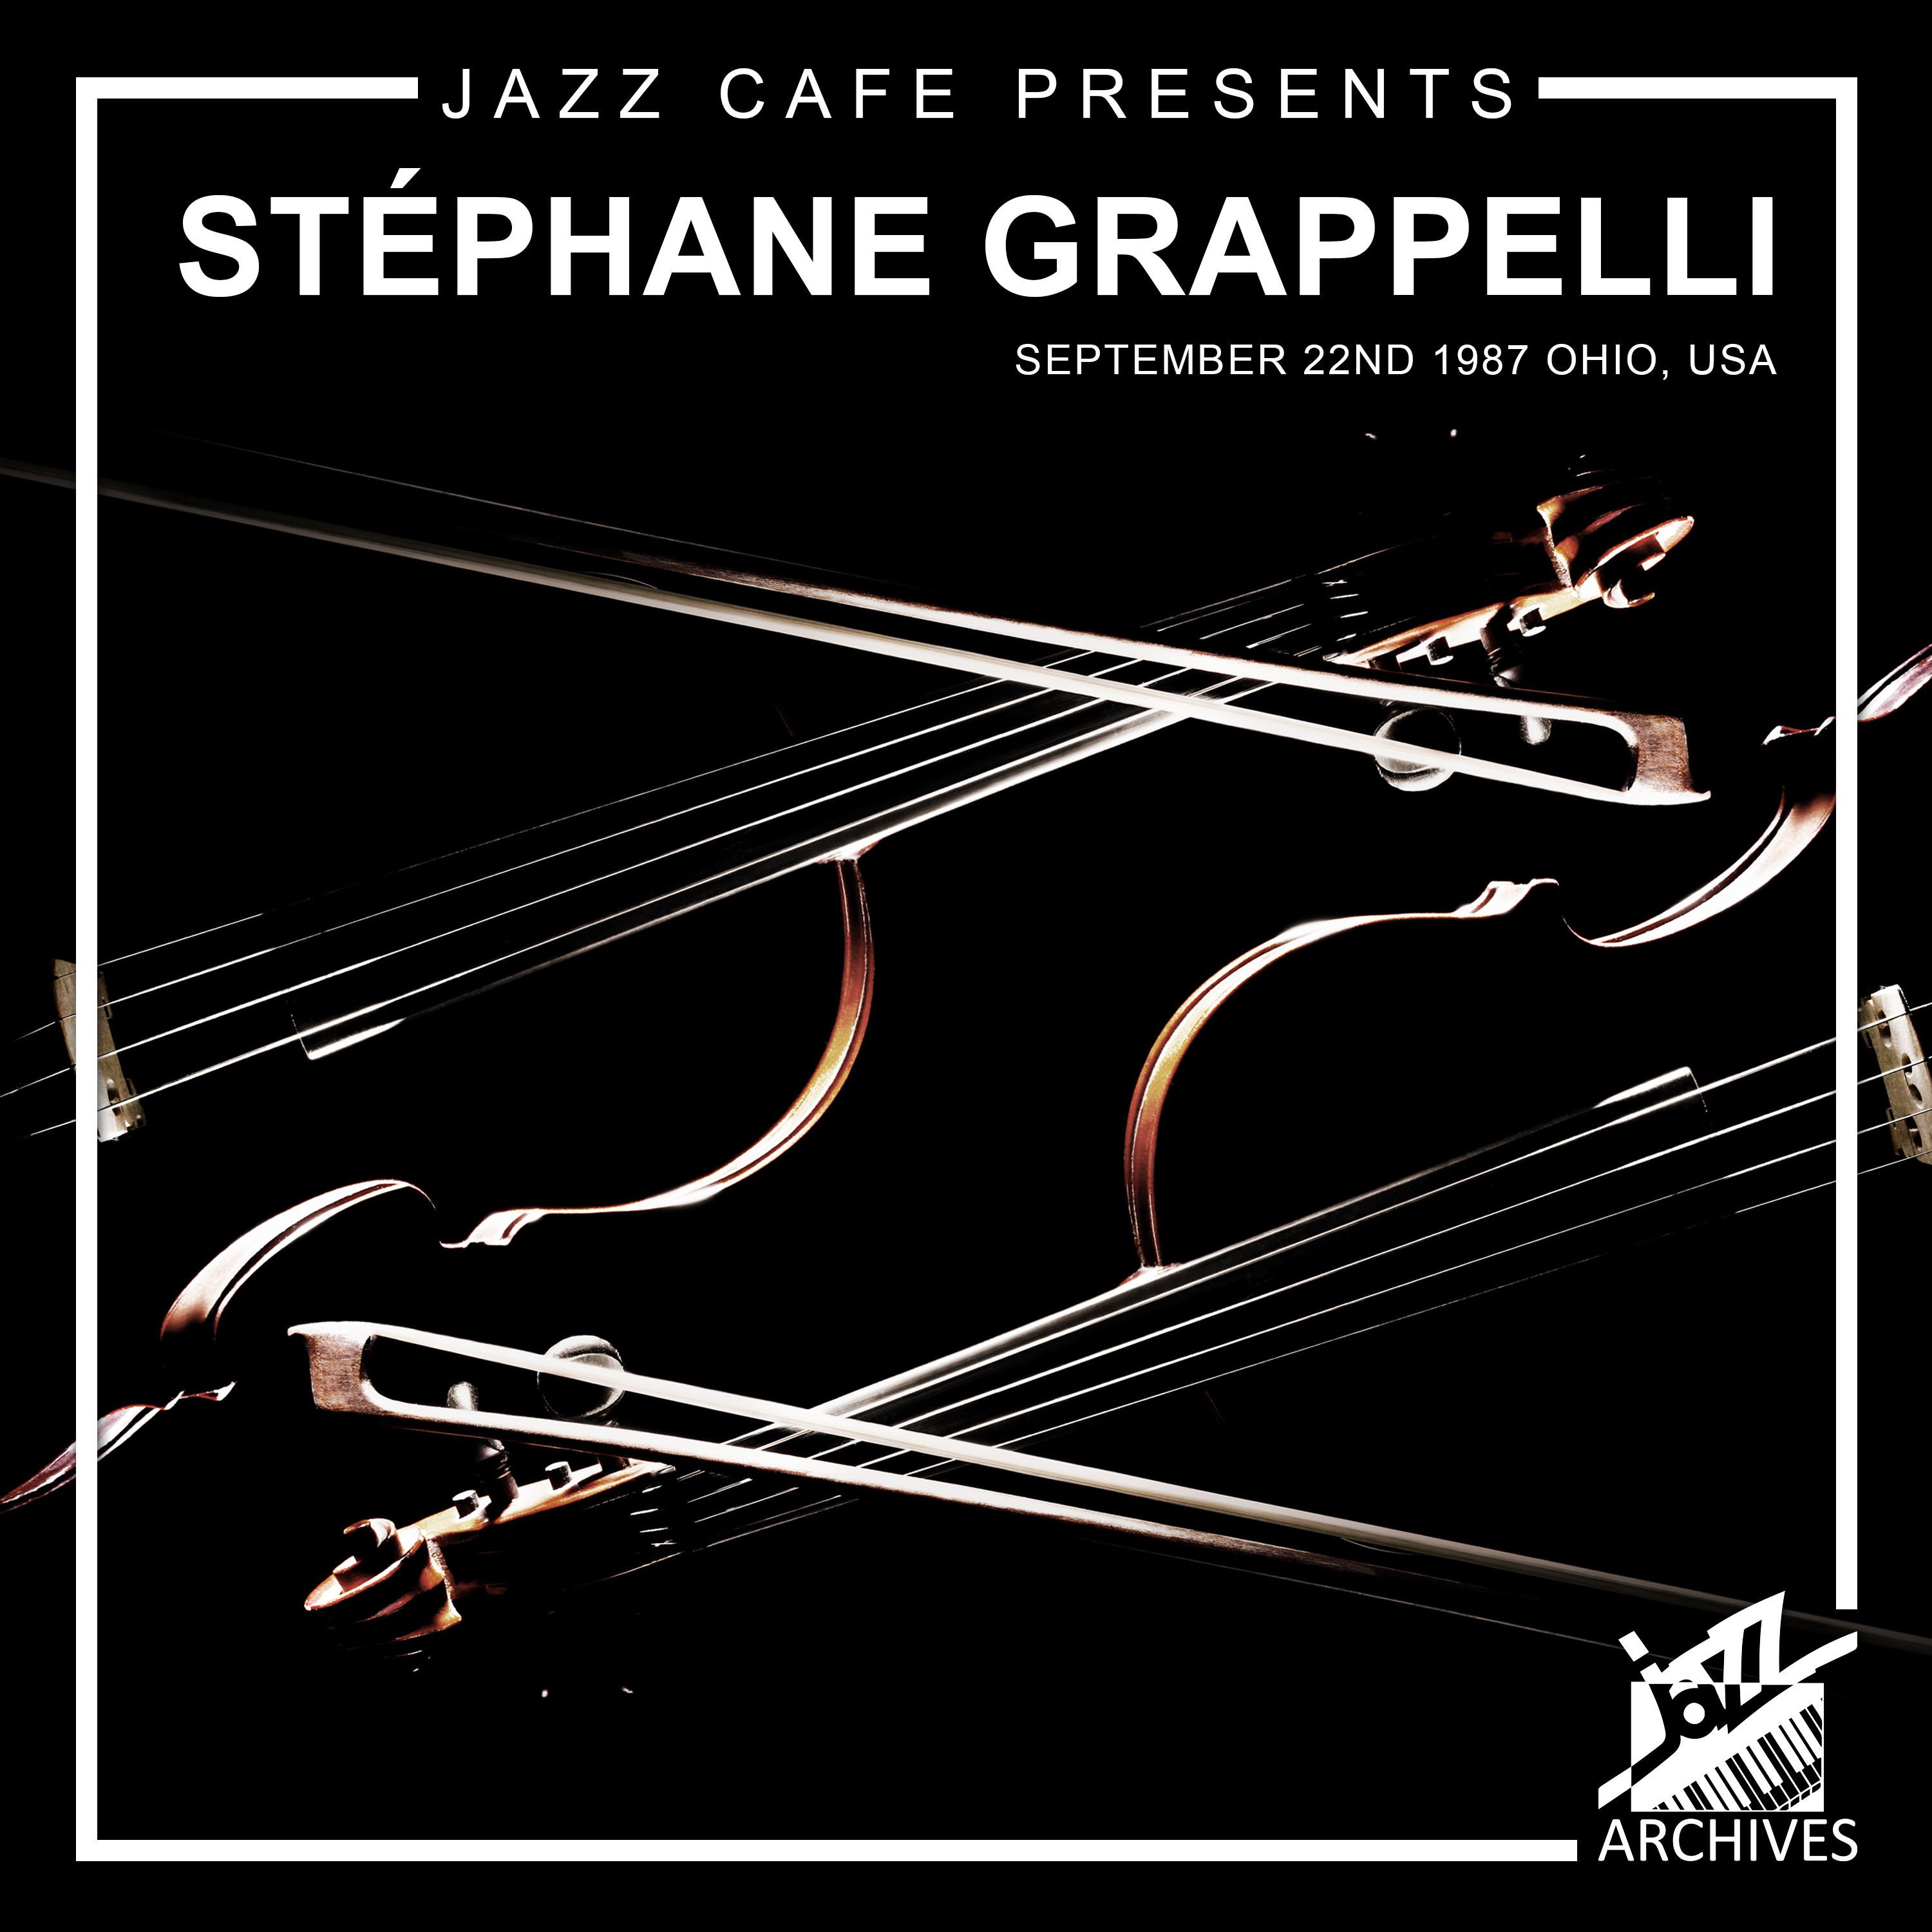 Jazz Cafe Presents: Ste phane Grappelli Recorded September 22nd, 1987, Ohio, USA